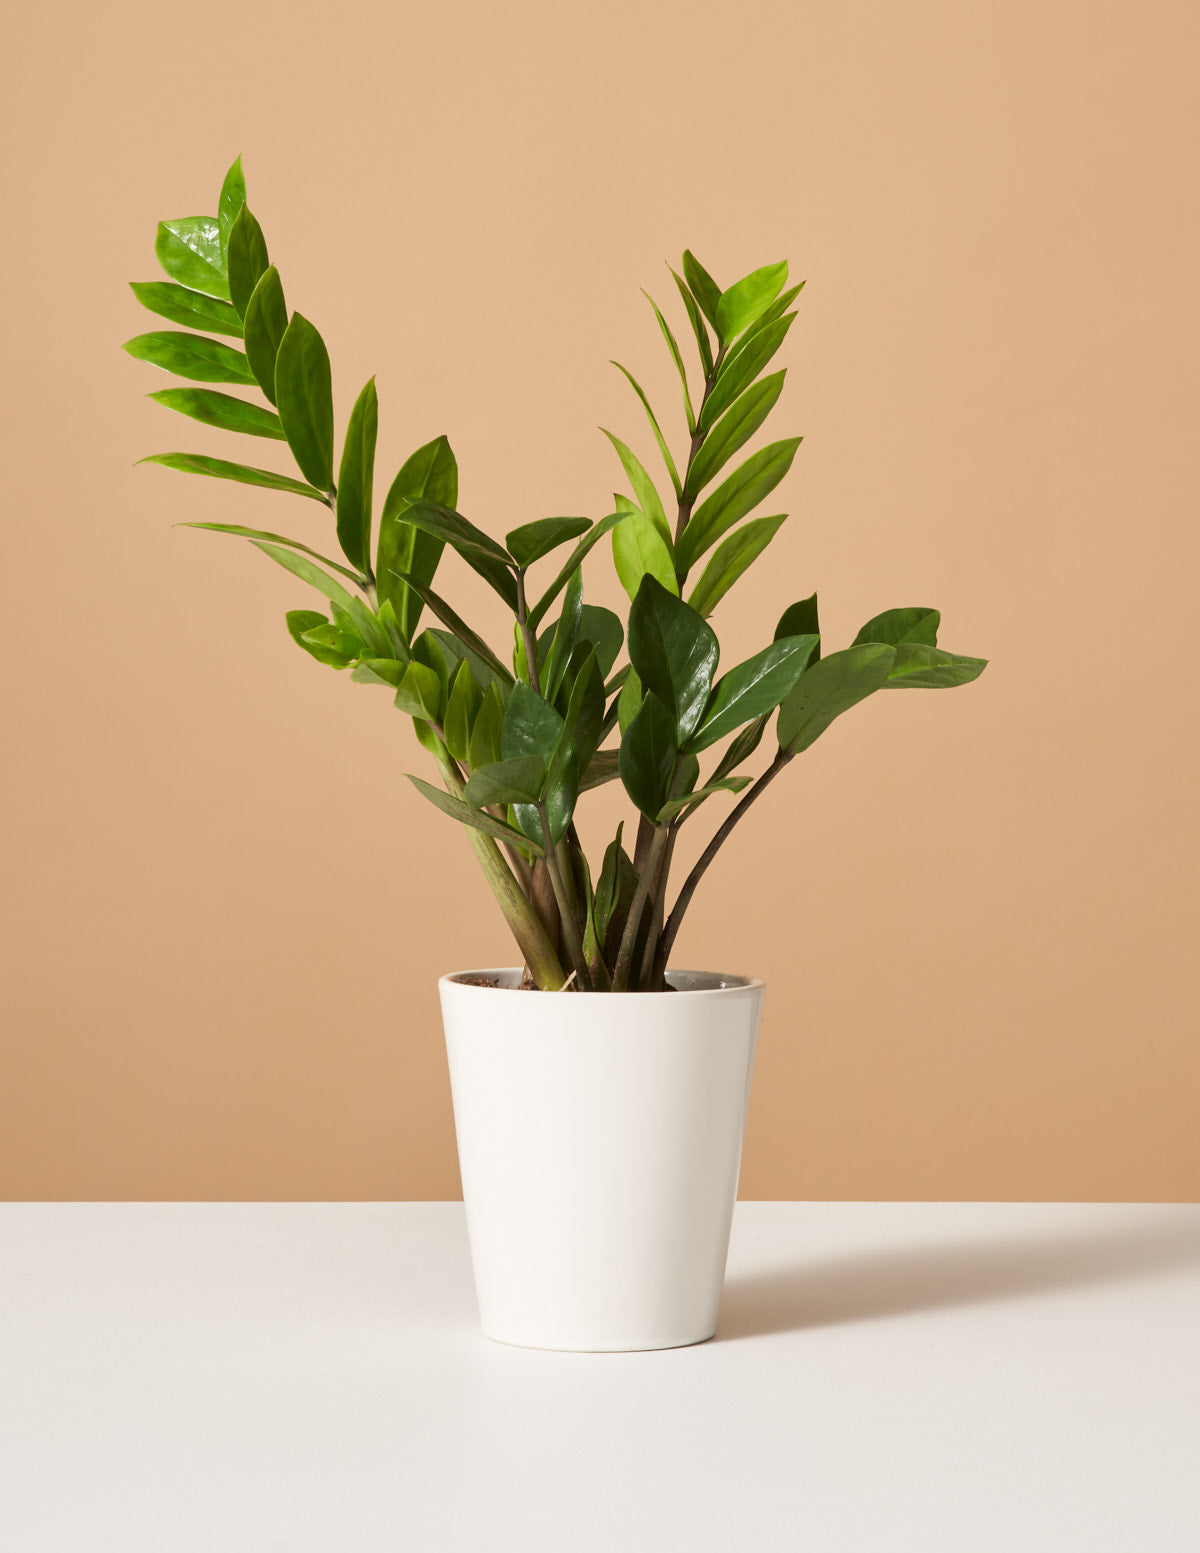 ZZ Plant | Low Light Plants & Houseplants Delivery | The Sill